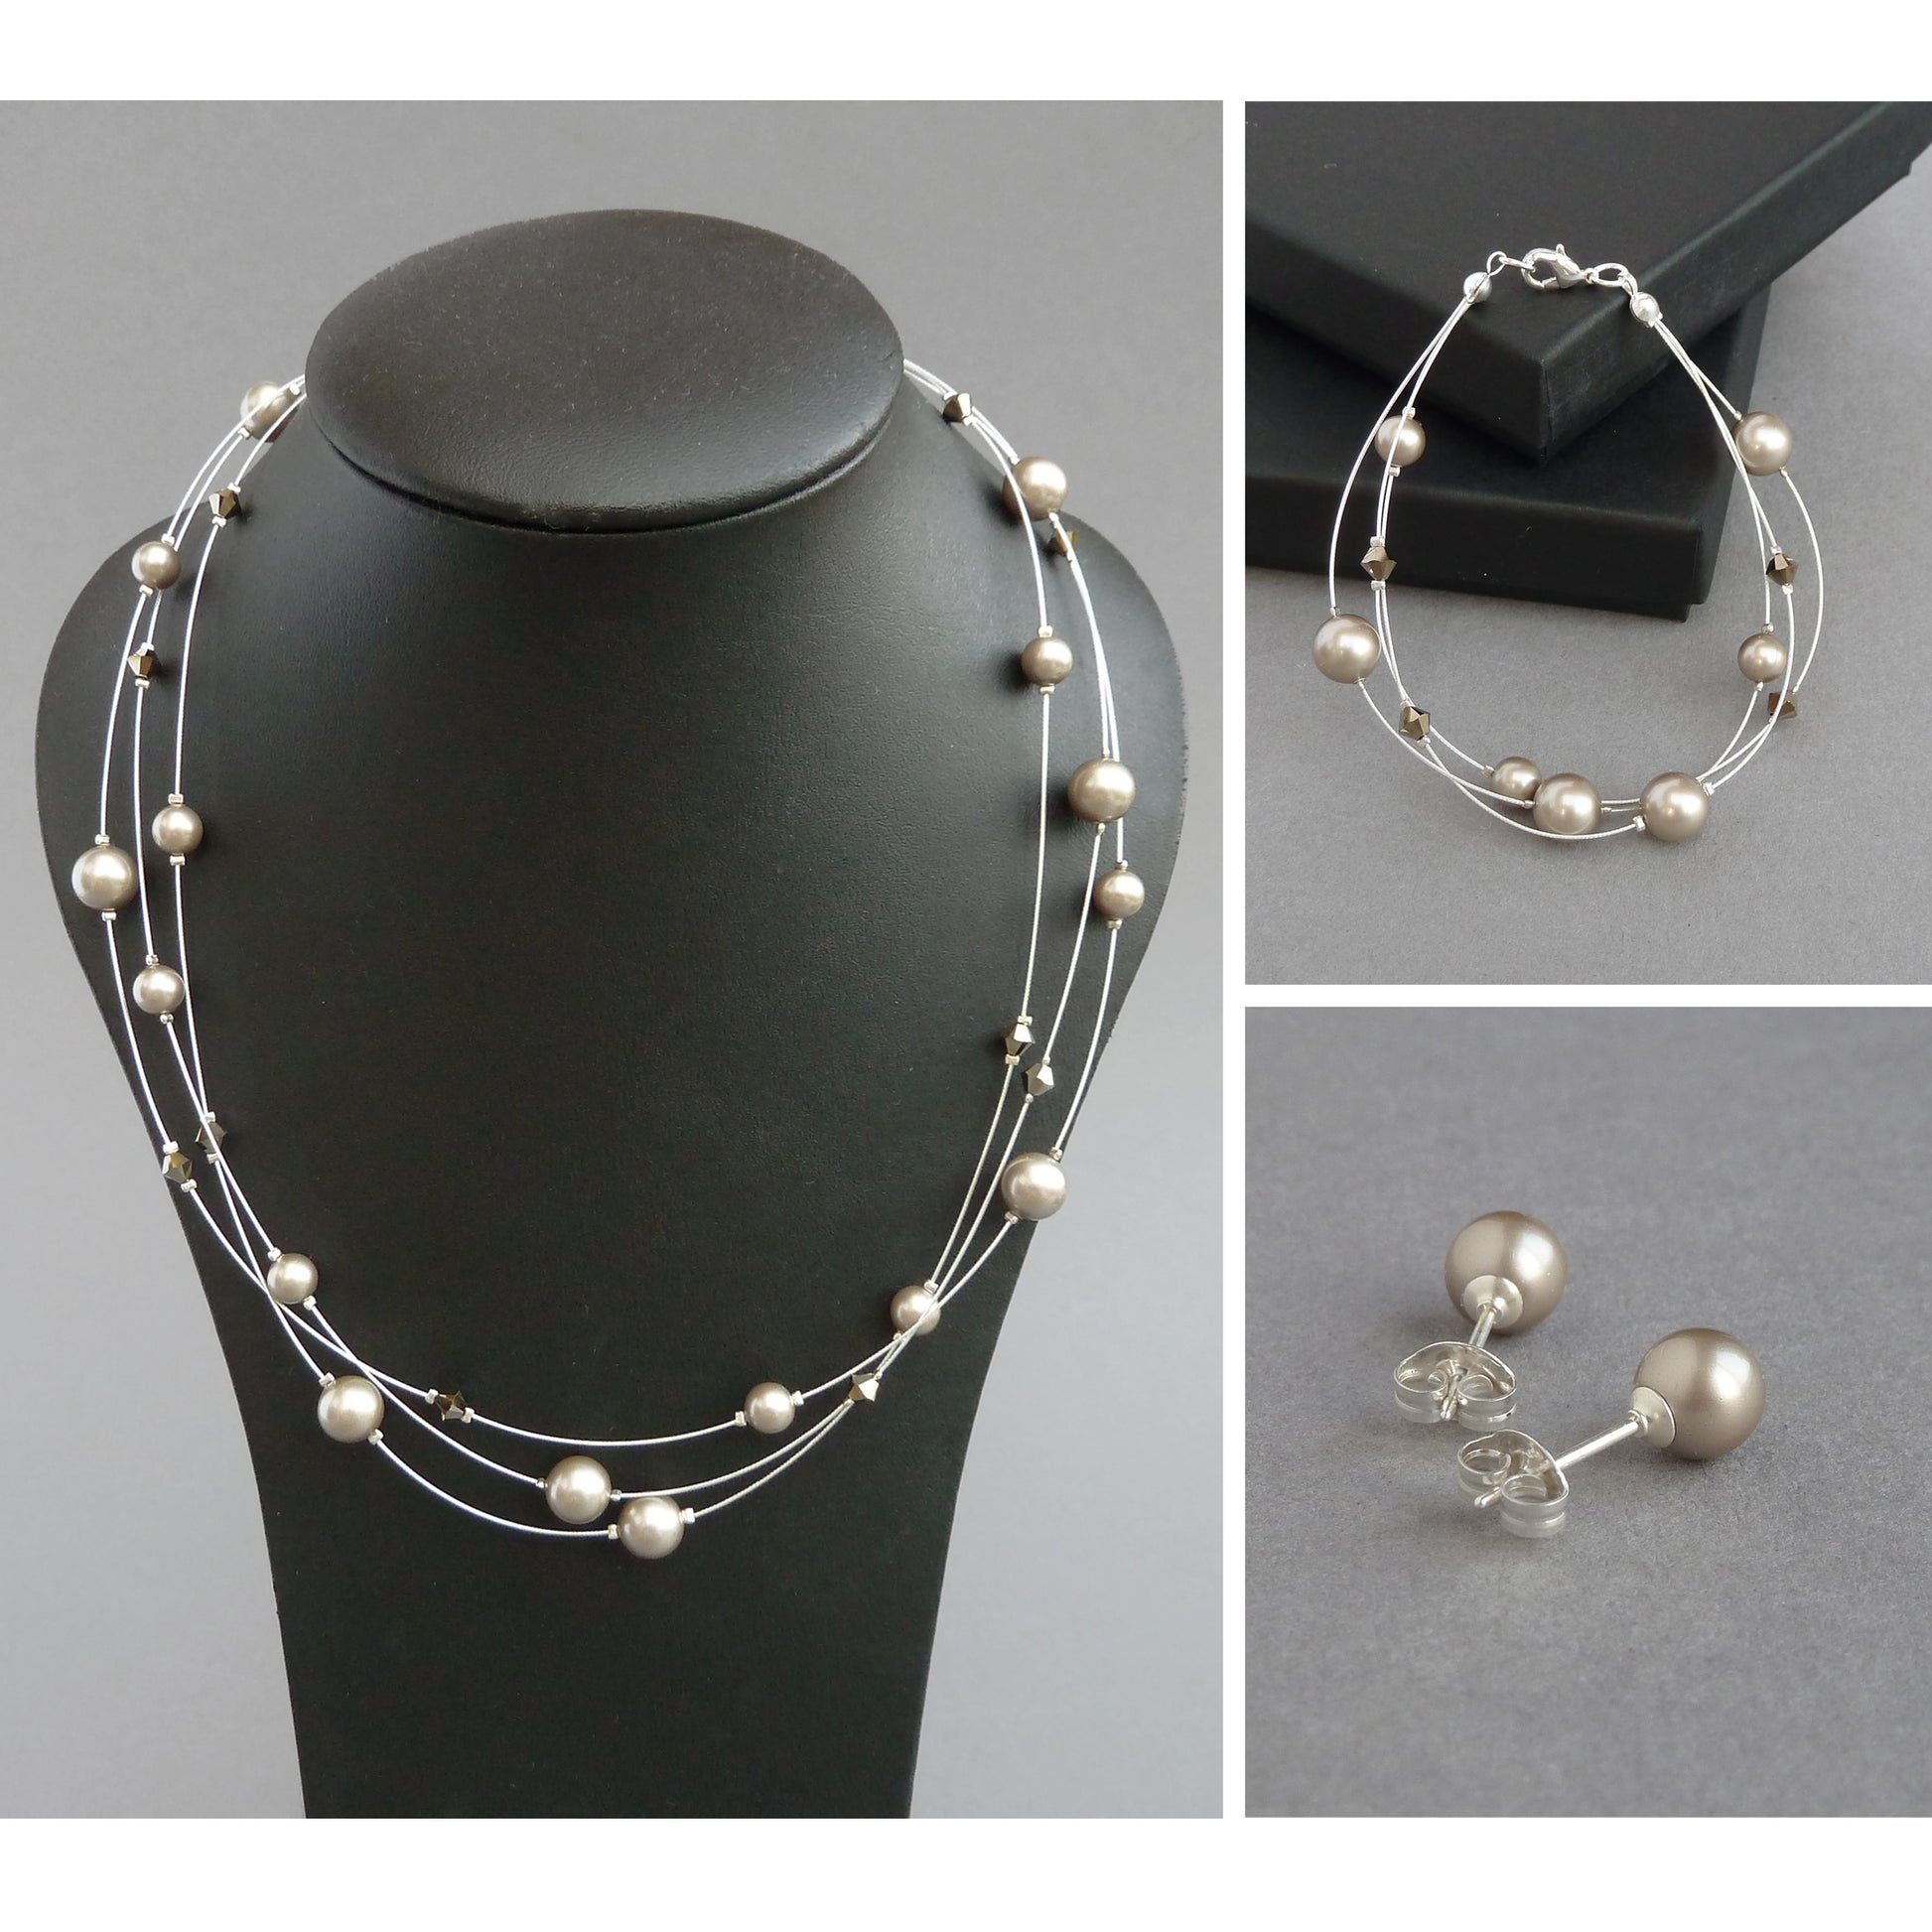 Champagne floating pearl jewellery set by Anna King